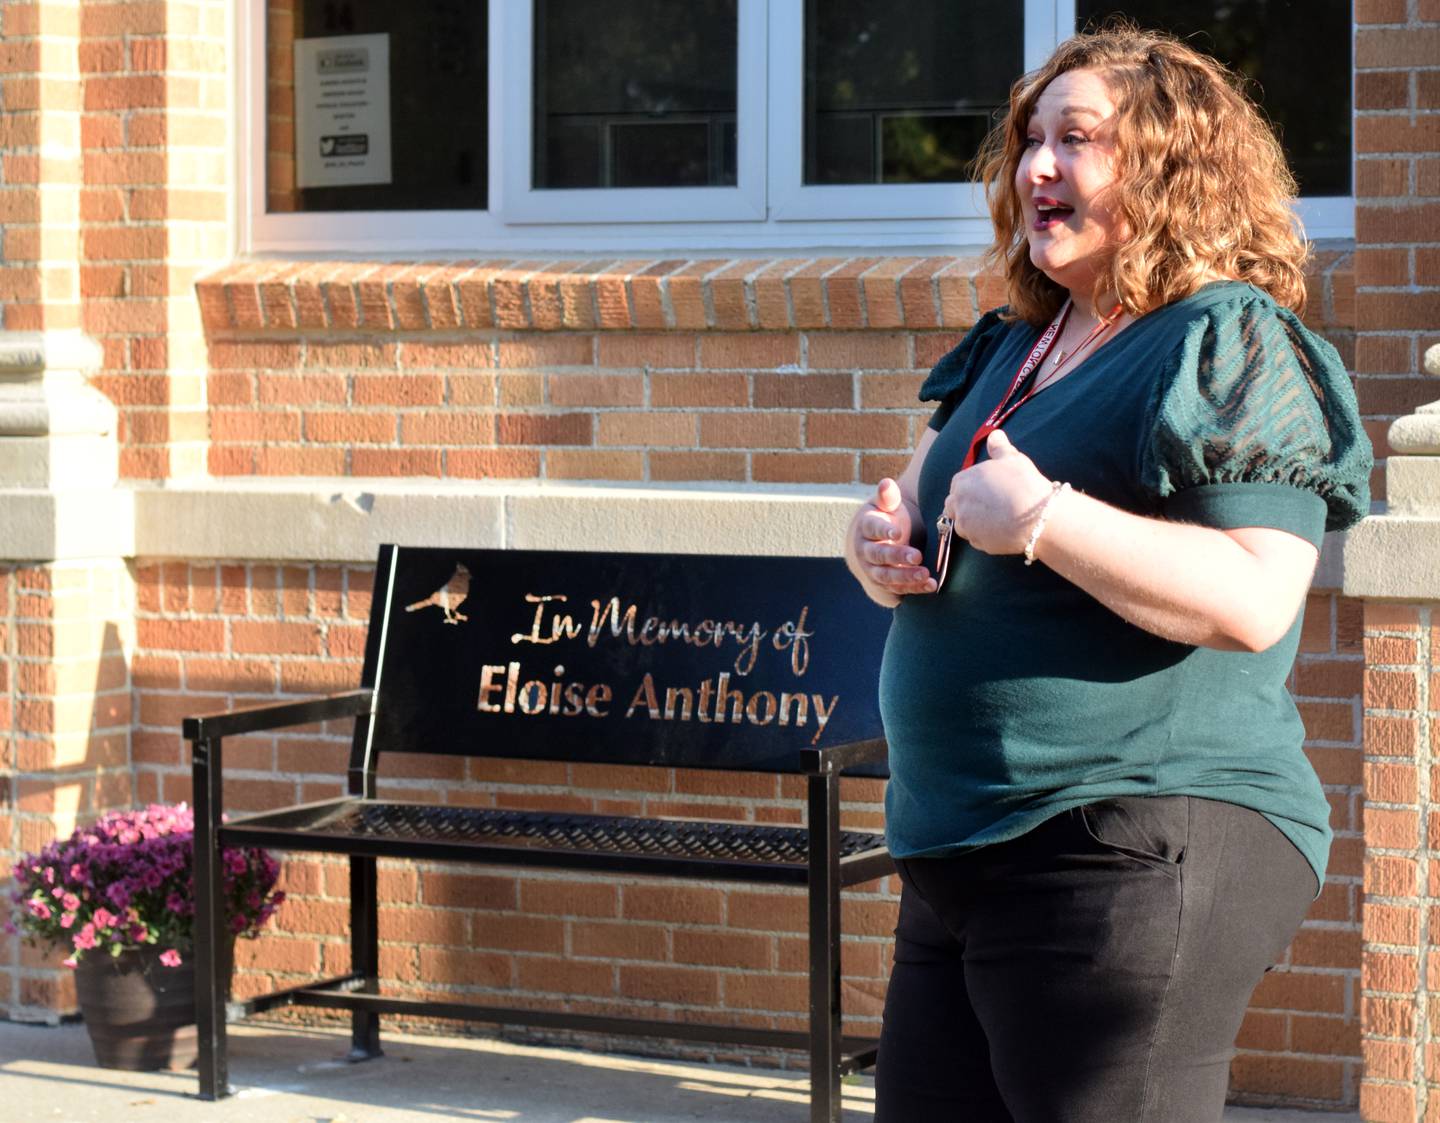 Miranda Bratland, a third grade teacher at Emerson Hough, speaks about her mentor, Eloise Anthony, during a bench dedication on Sept. 13 in Newton.